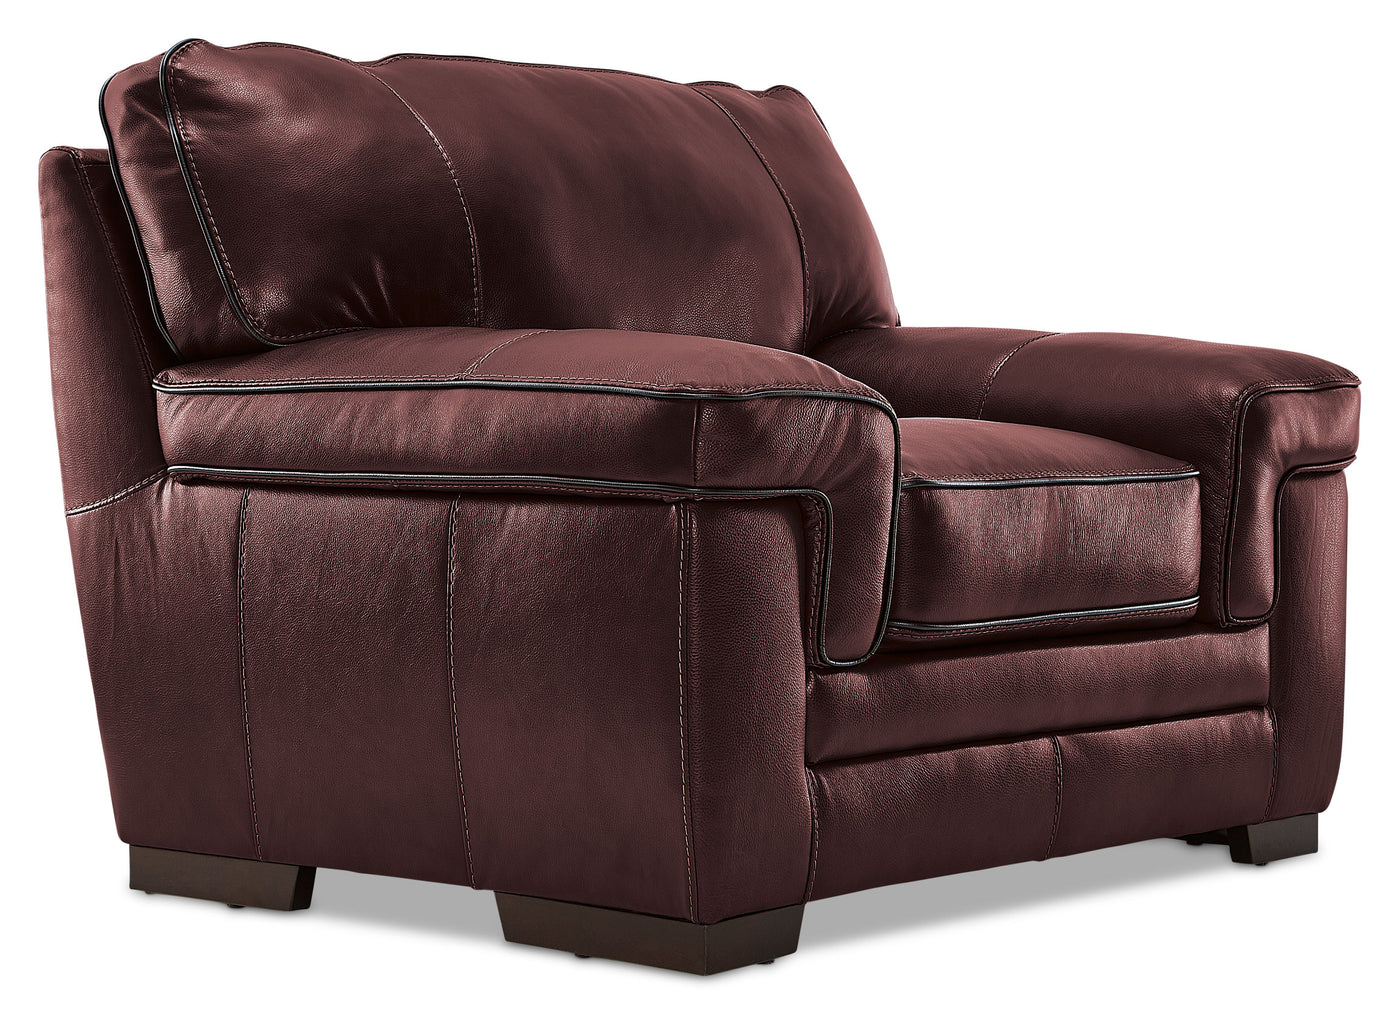 Stampede Leather Sofa, Loveseat and Chair Set - Salsa